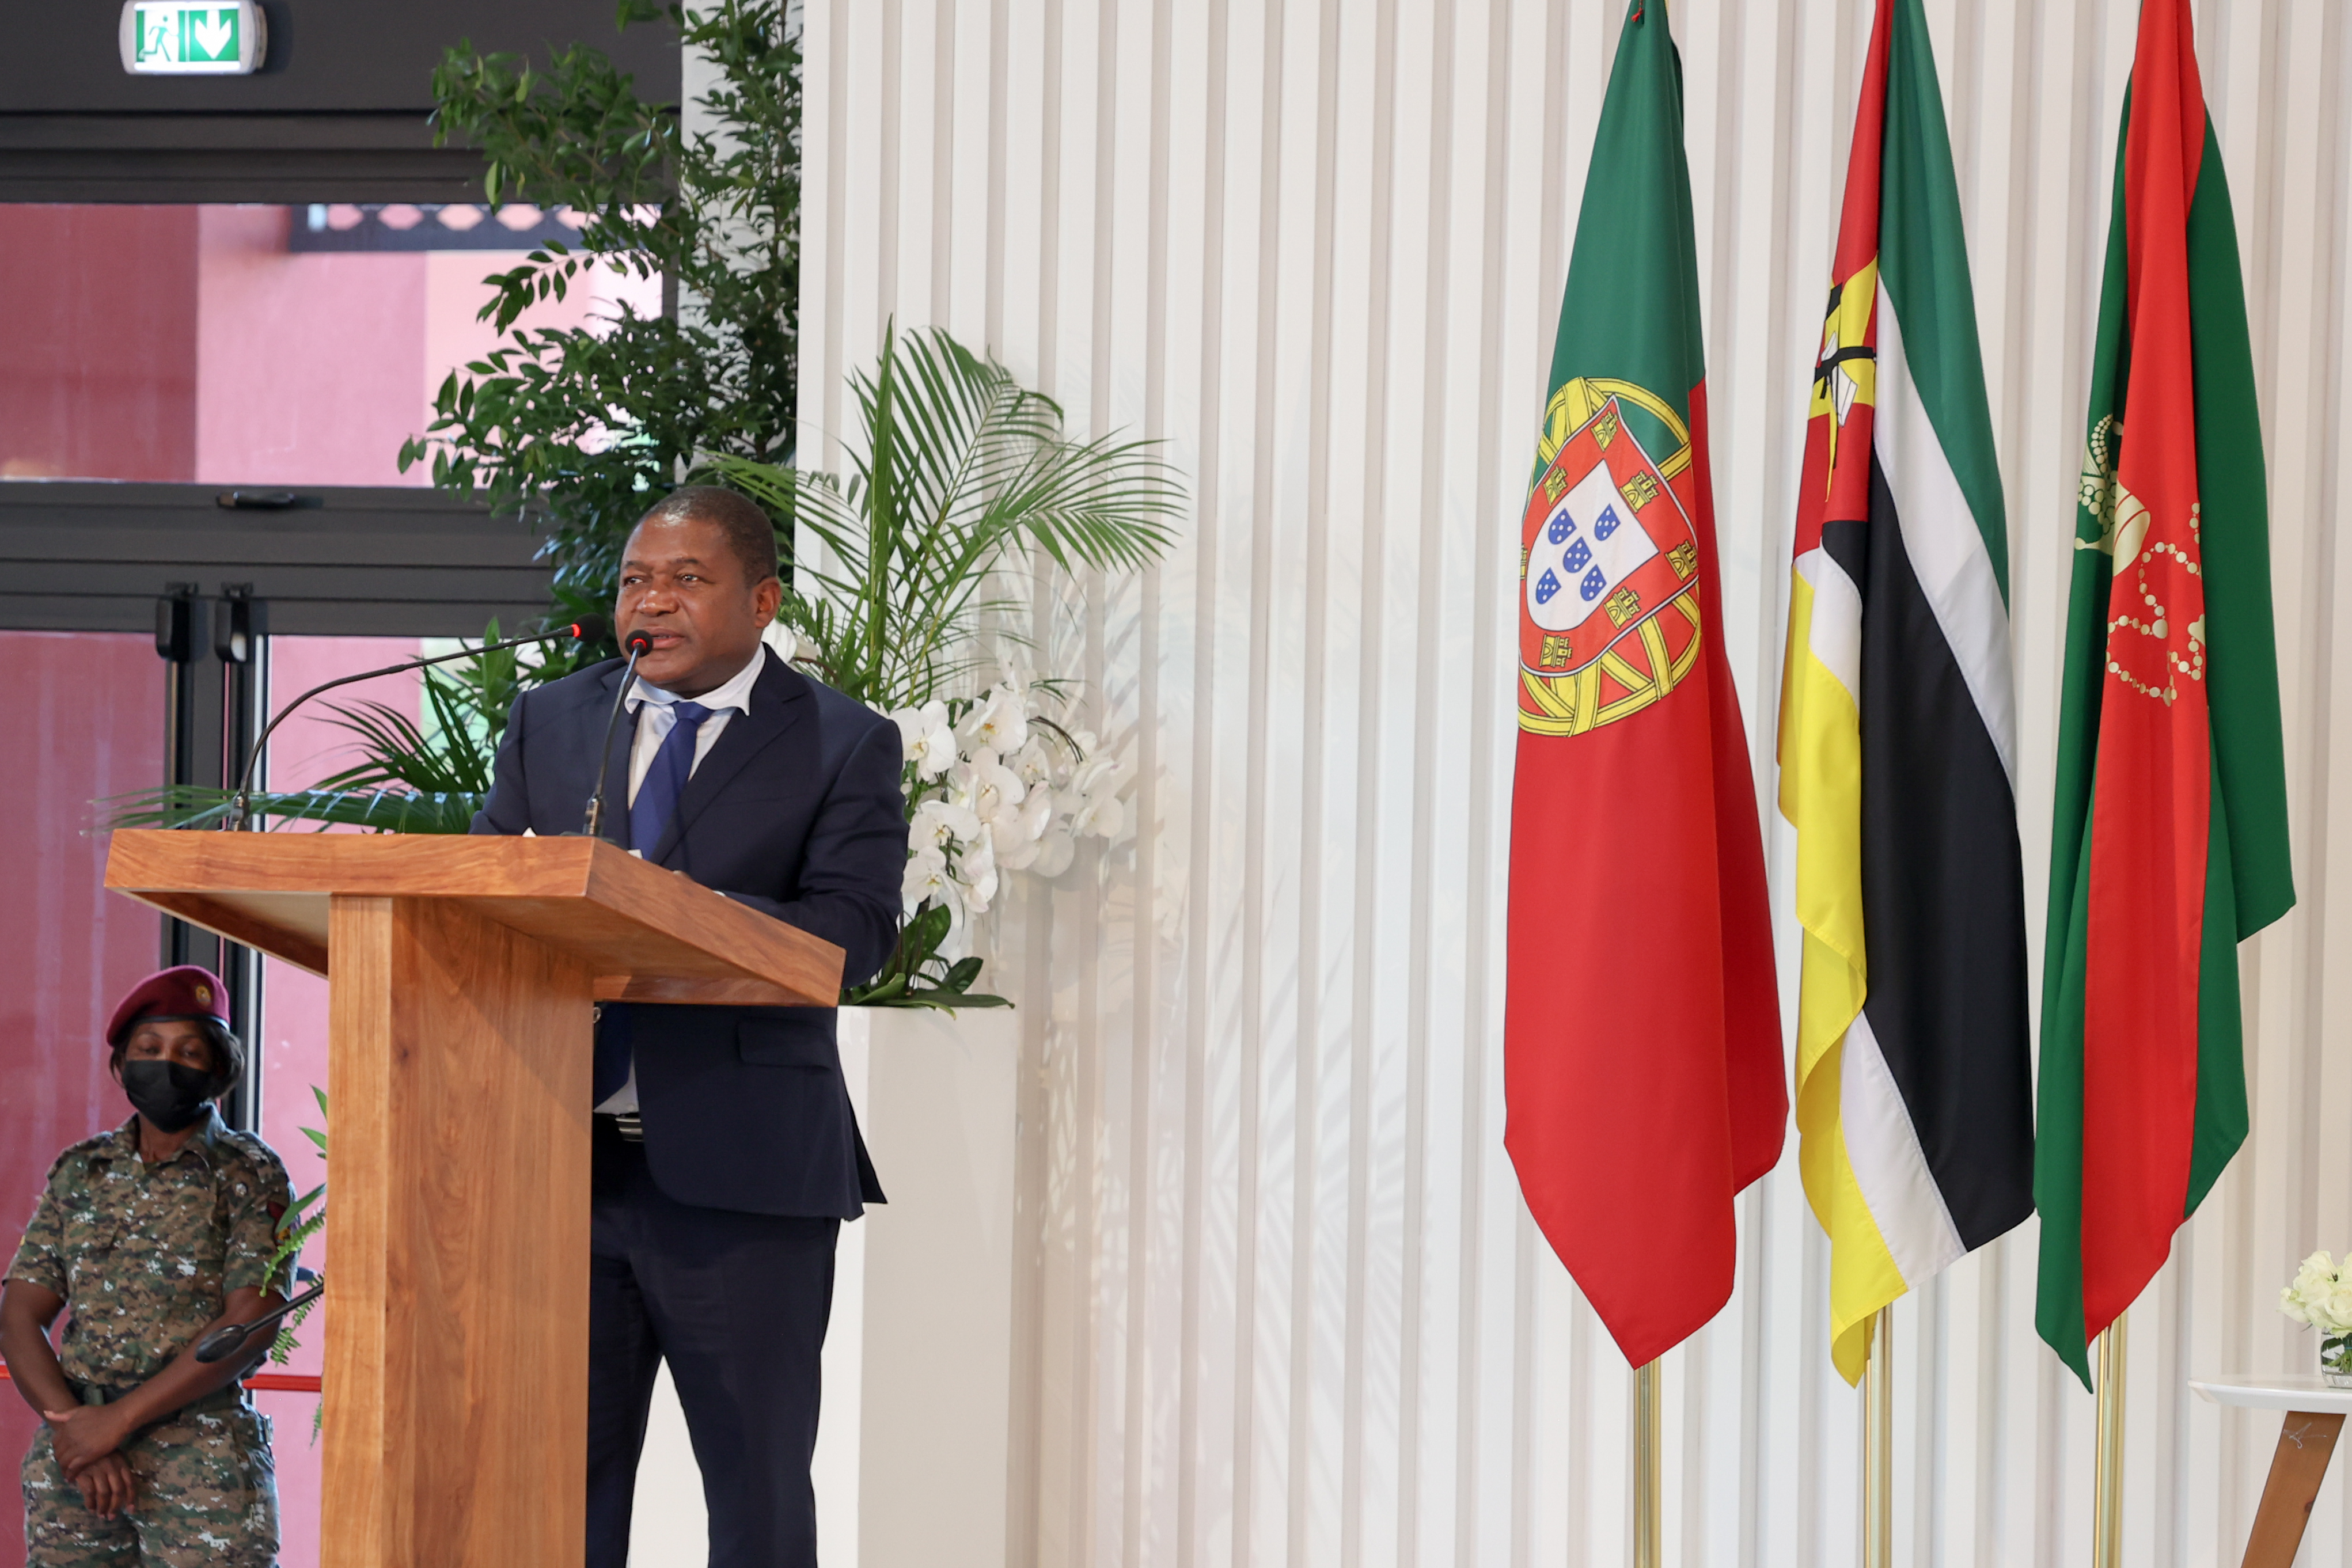 Mozambique's President Filipe Nyusi addressing guests at the inauguration of the Aga Khan Academy Maputo on 19 March 2022.